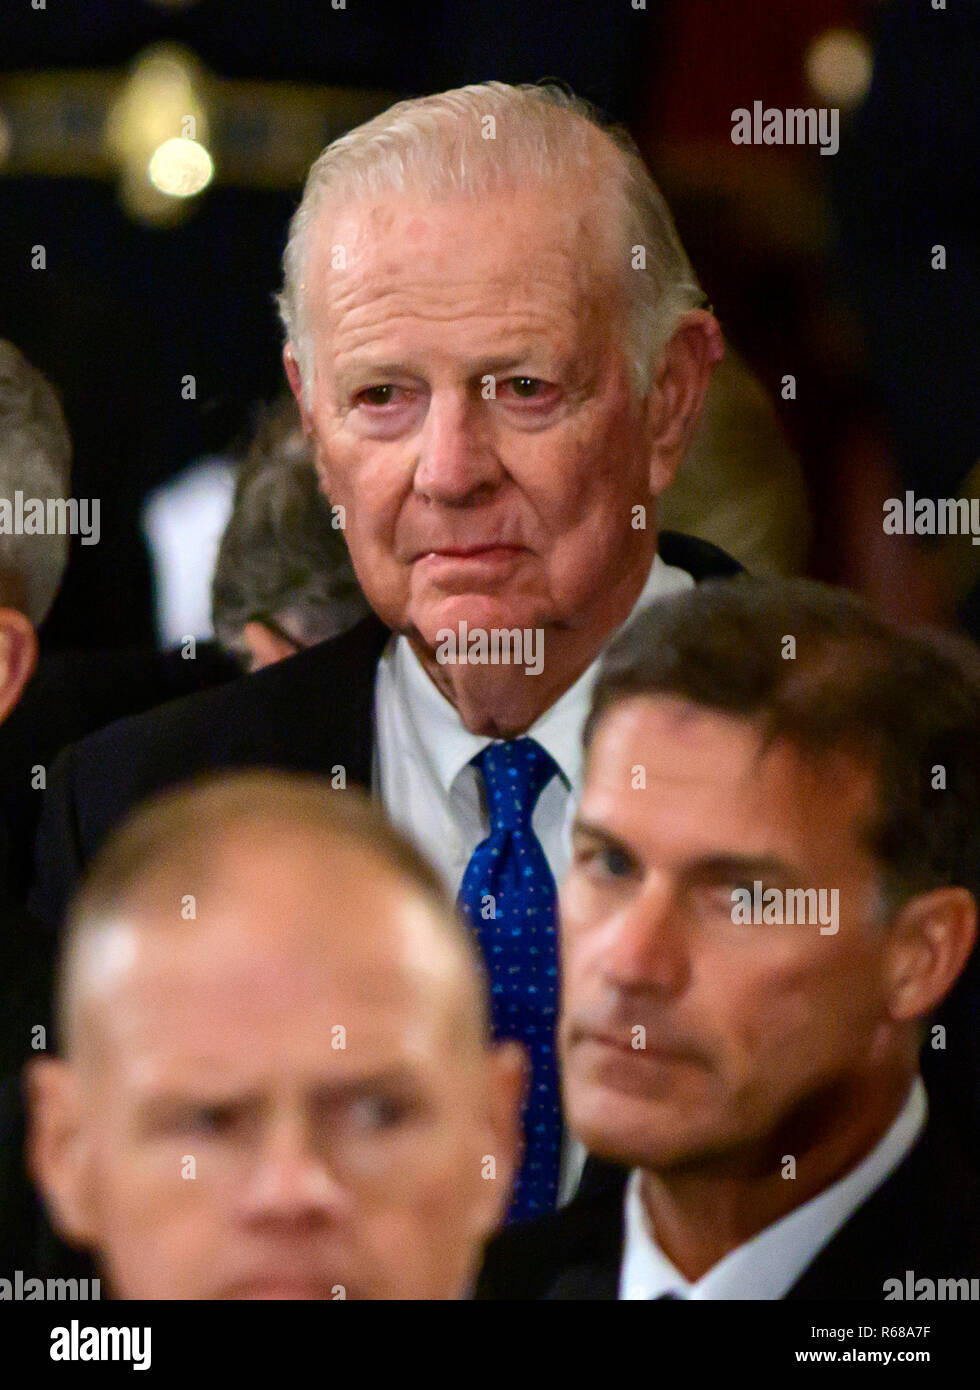 Former United States Secretary of State James A. Baker, III at the ceremony honoring former United States President George H.W. Bush, who will Lie in State in the Rotunda of the US Capitol on Monday, December 3, 2018. Baker also served as White House Chief of Staff for President Bush. Credit: Ron Sachs/CNP (RESTRICTION: NO New York or New Jersey Newspapers or newspapers within a 75 mile radius of New York City) | usage worldwide Stock Photo